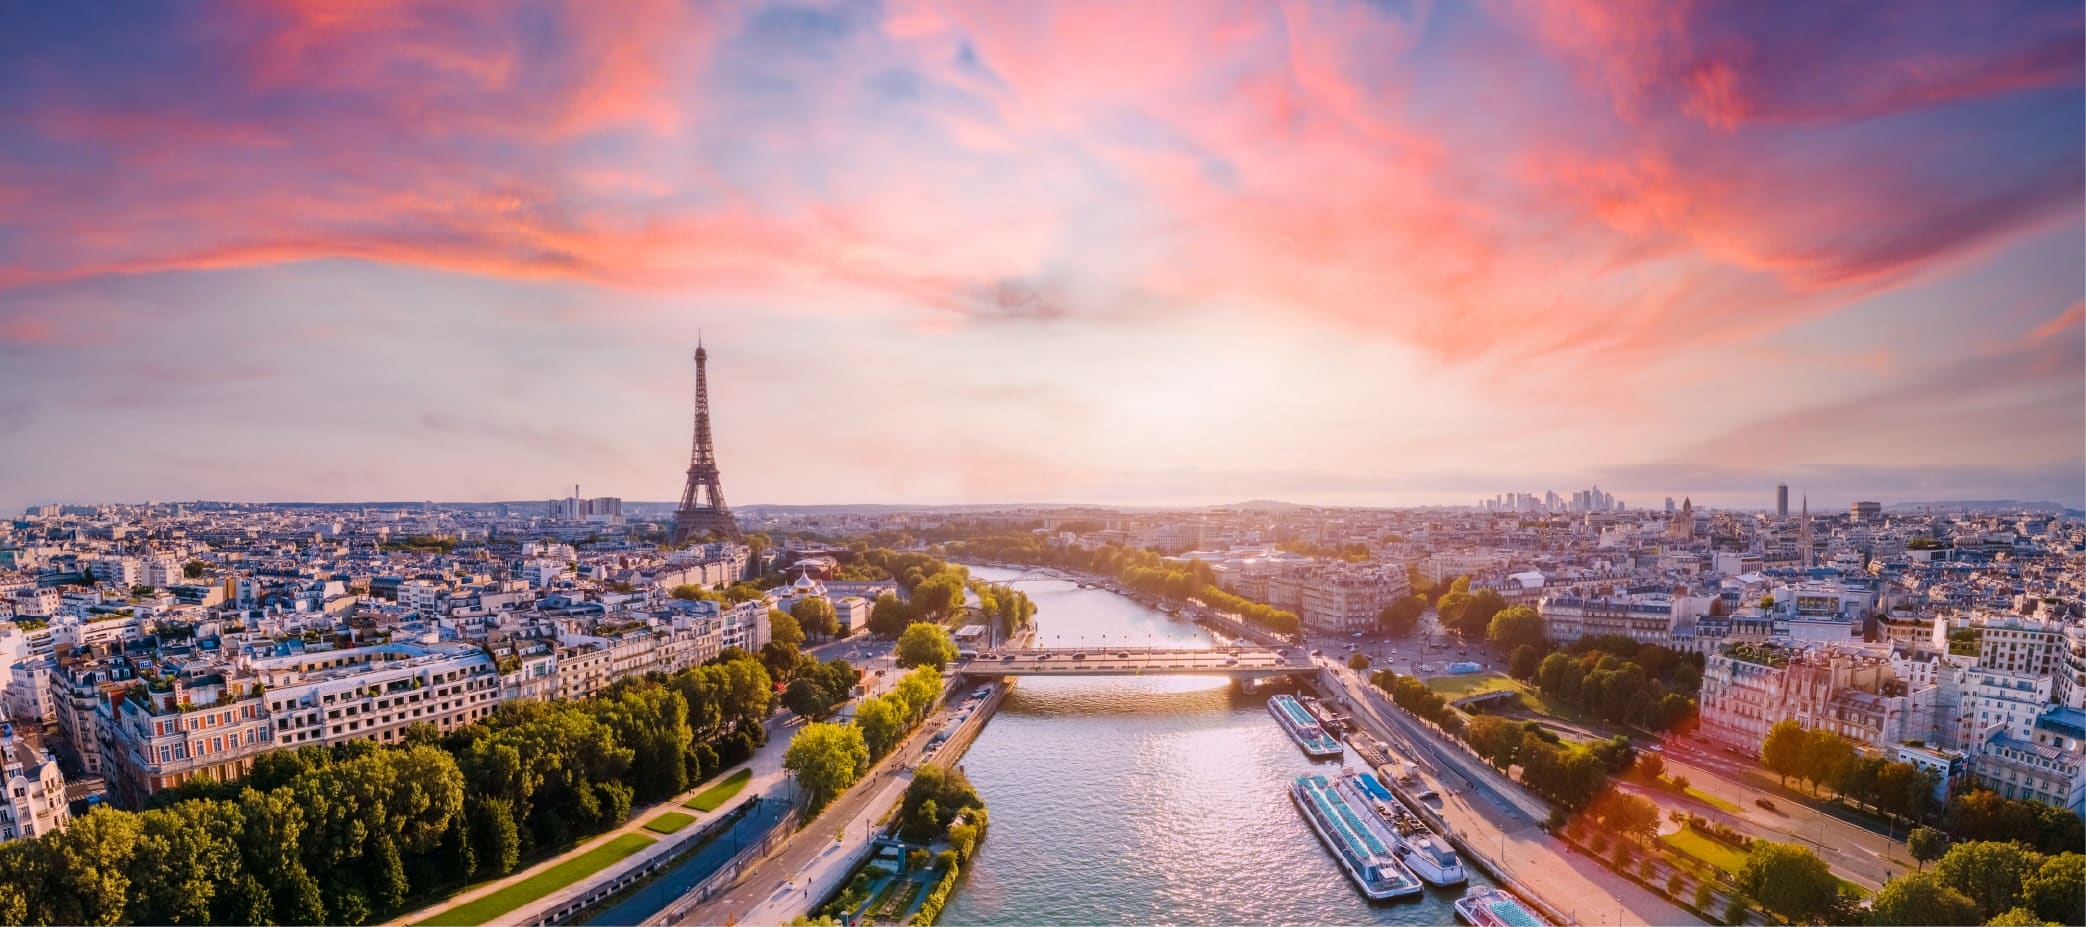 paris tickets tours and attractions • Paris Tickets